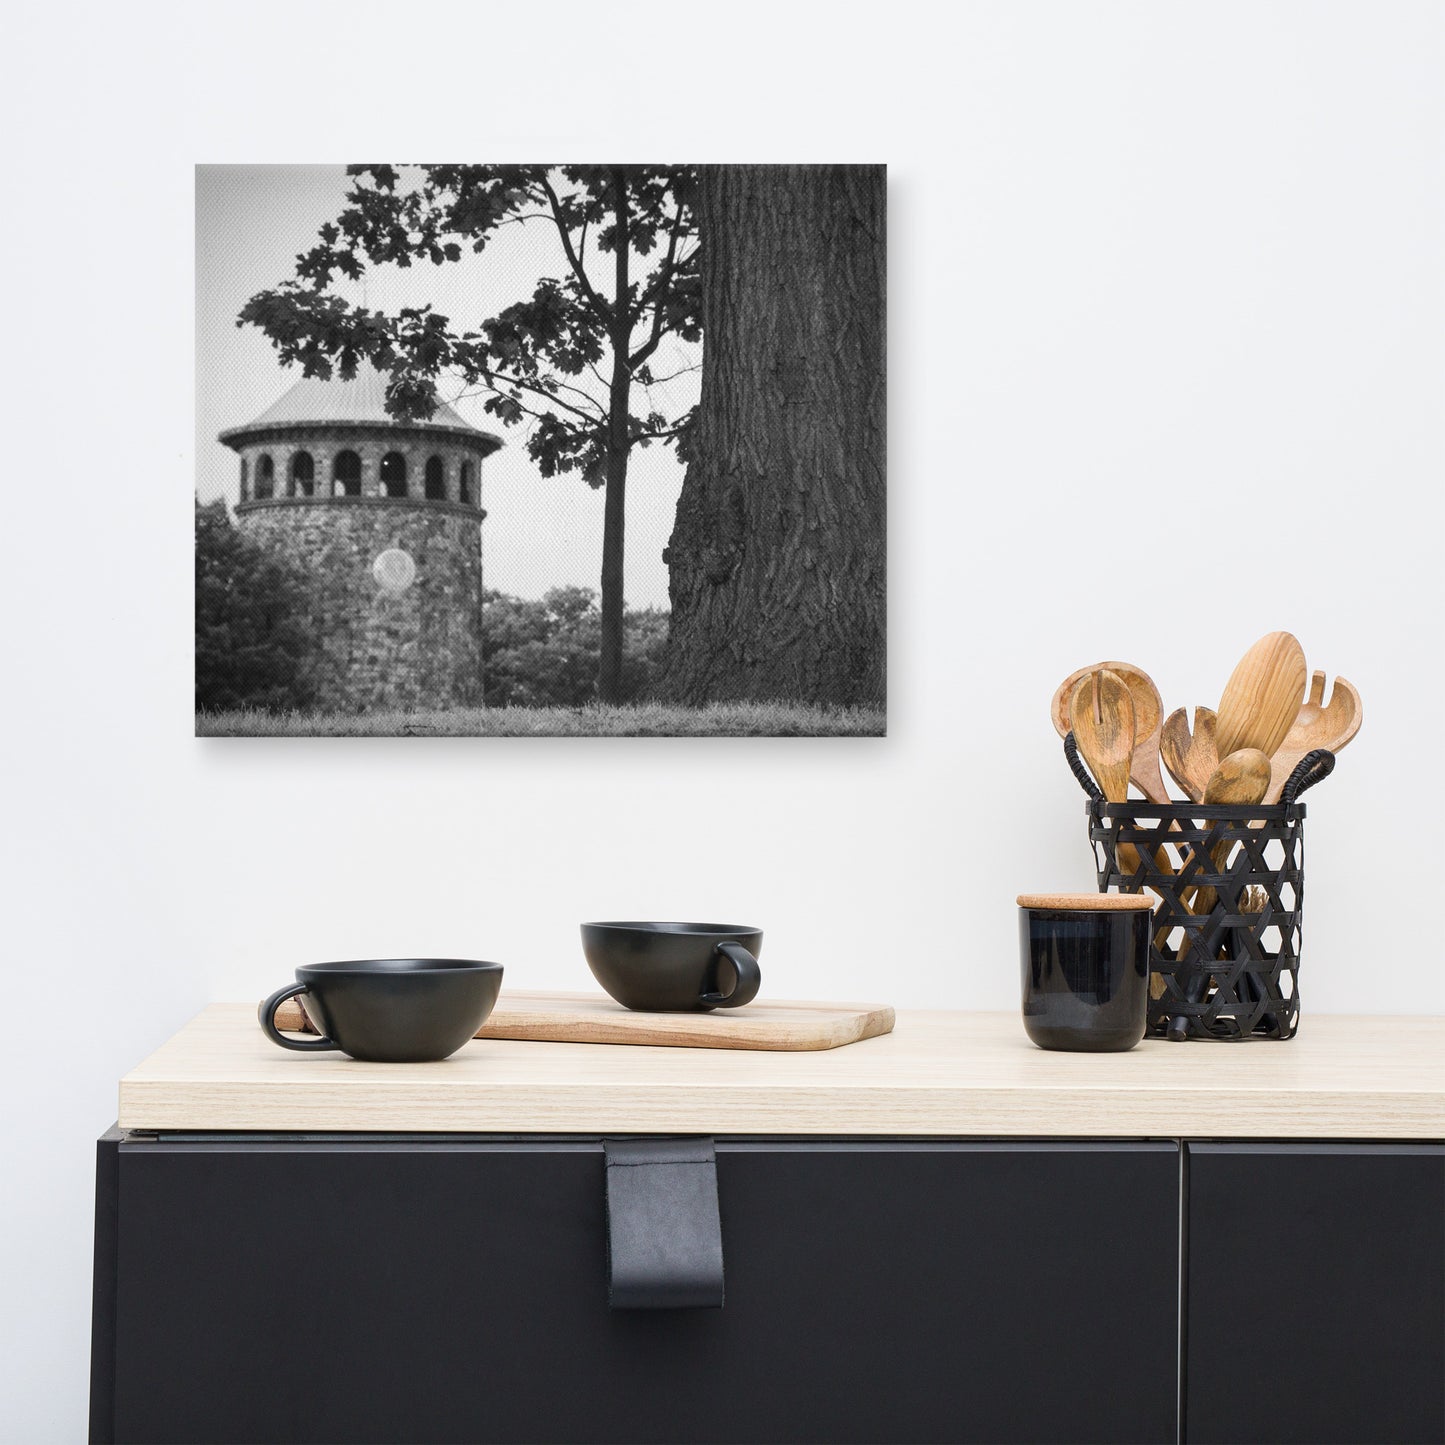 Rockford Tower 2 Black and White Rural Landscape Canvas Wall Art Prints